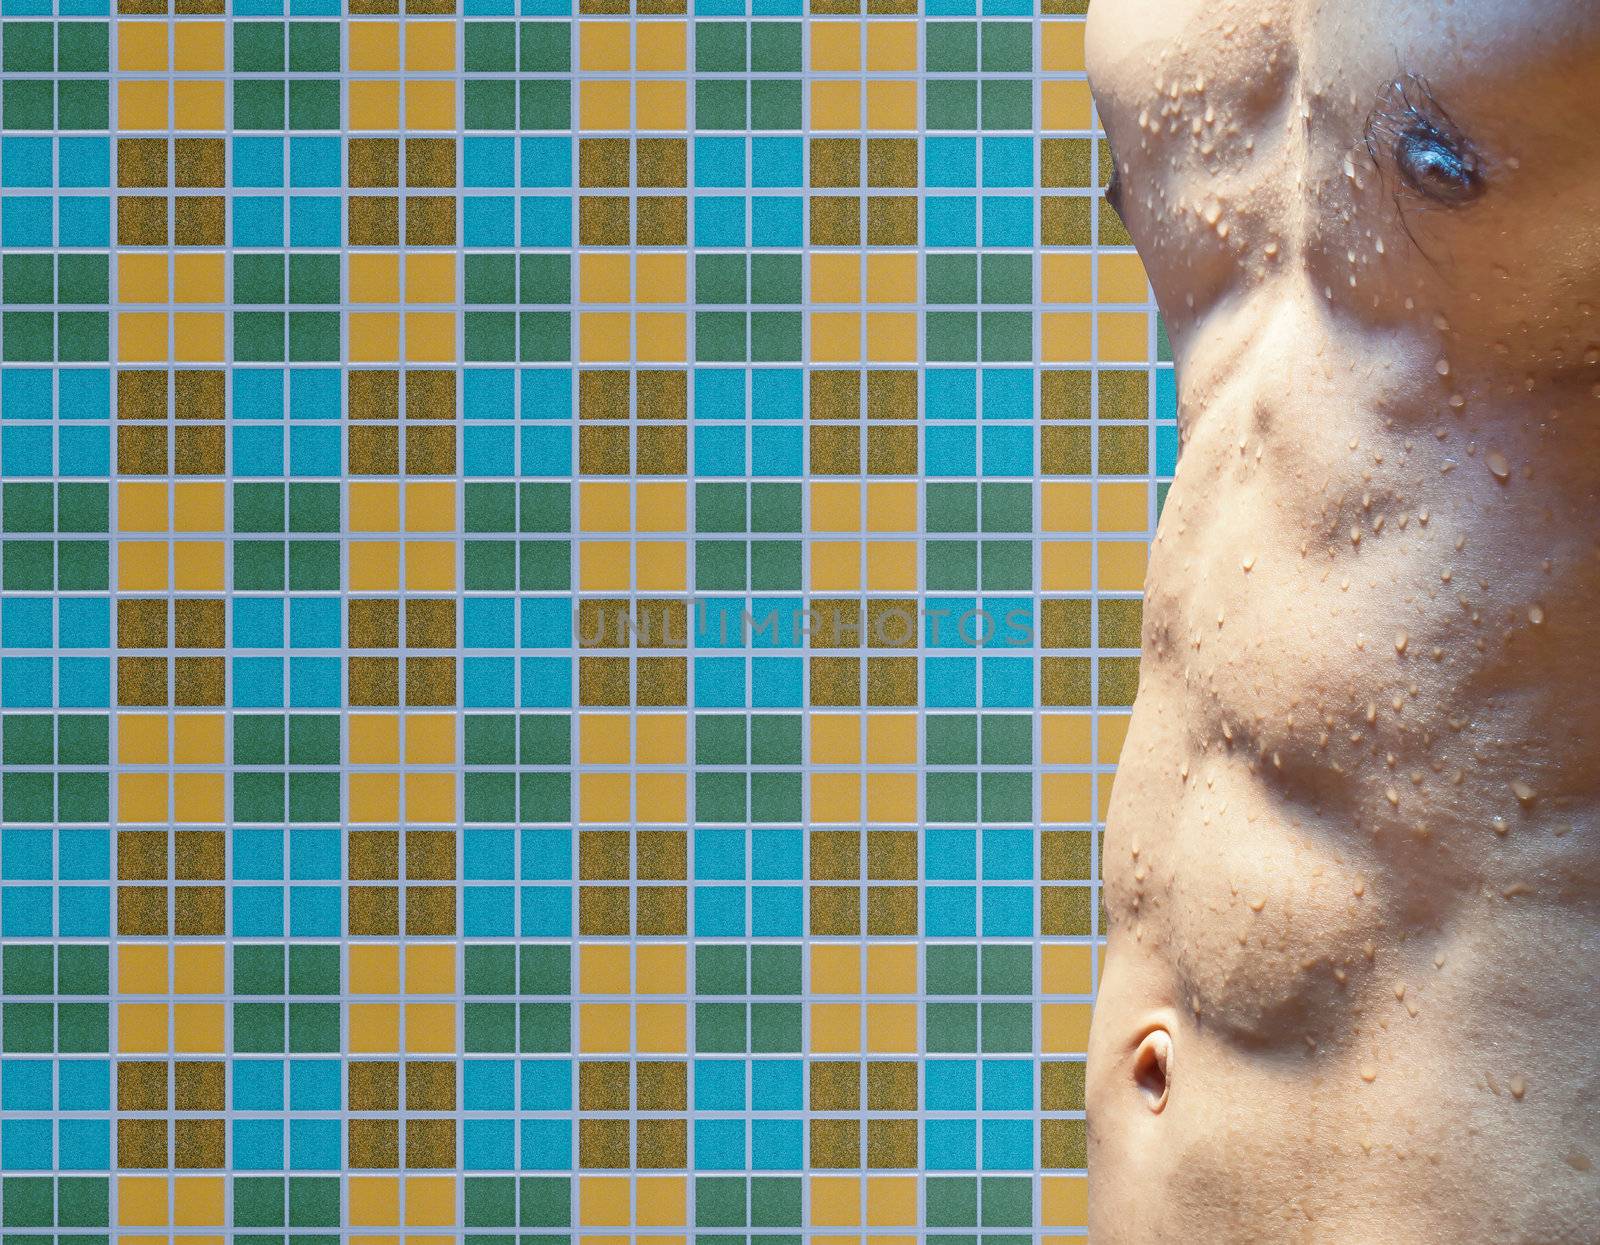 Wet torso with water drops against mosaic wall
